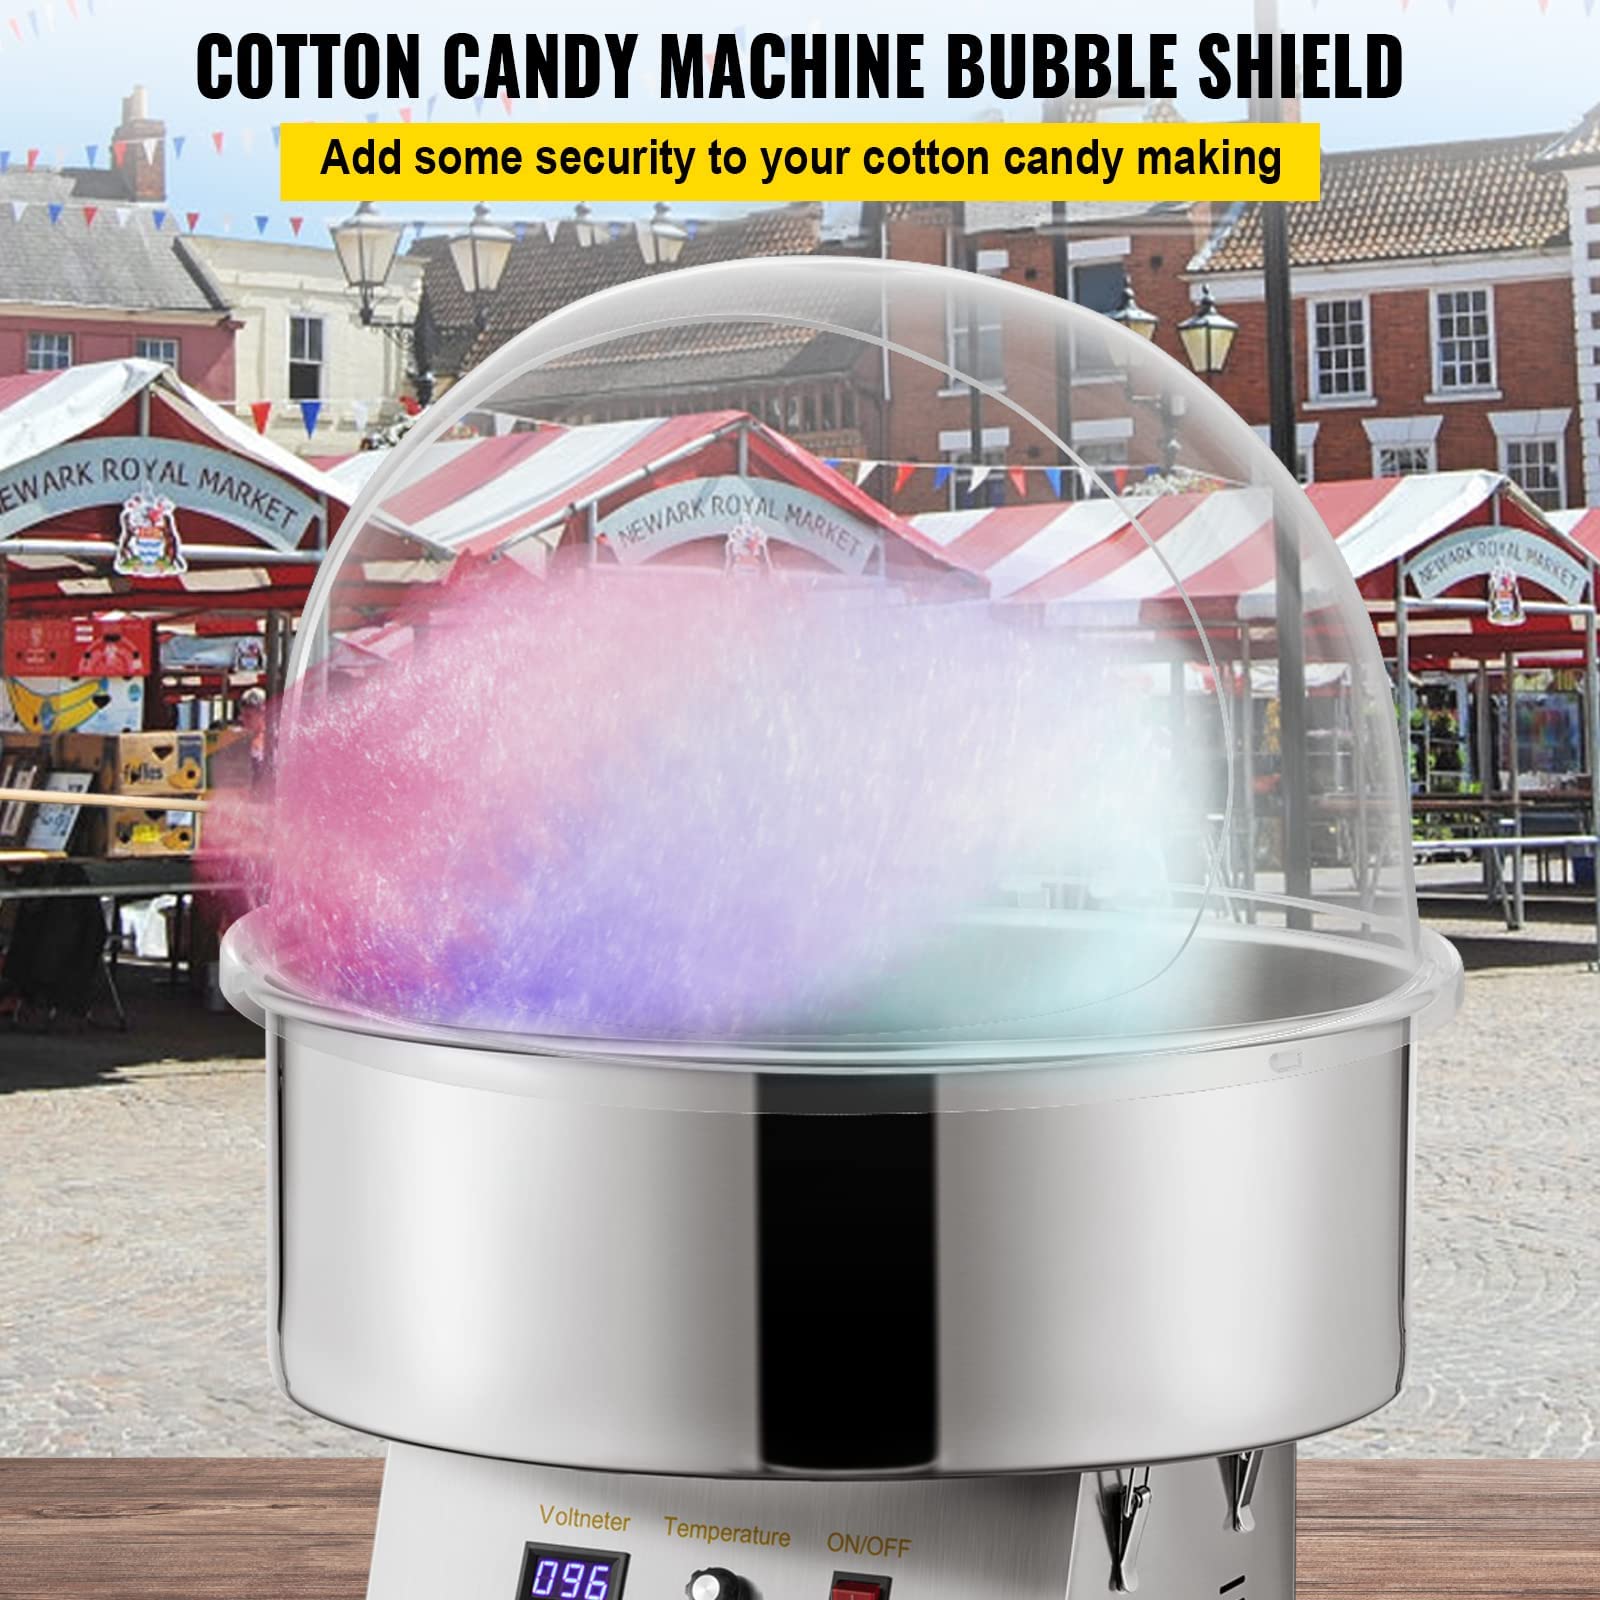 VBENLEM 21 Inch Cotton Candy Machine Cover Bubble Shield Plastic for Commercial Floss Maker, Clear